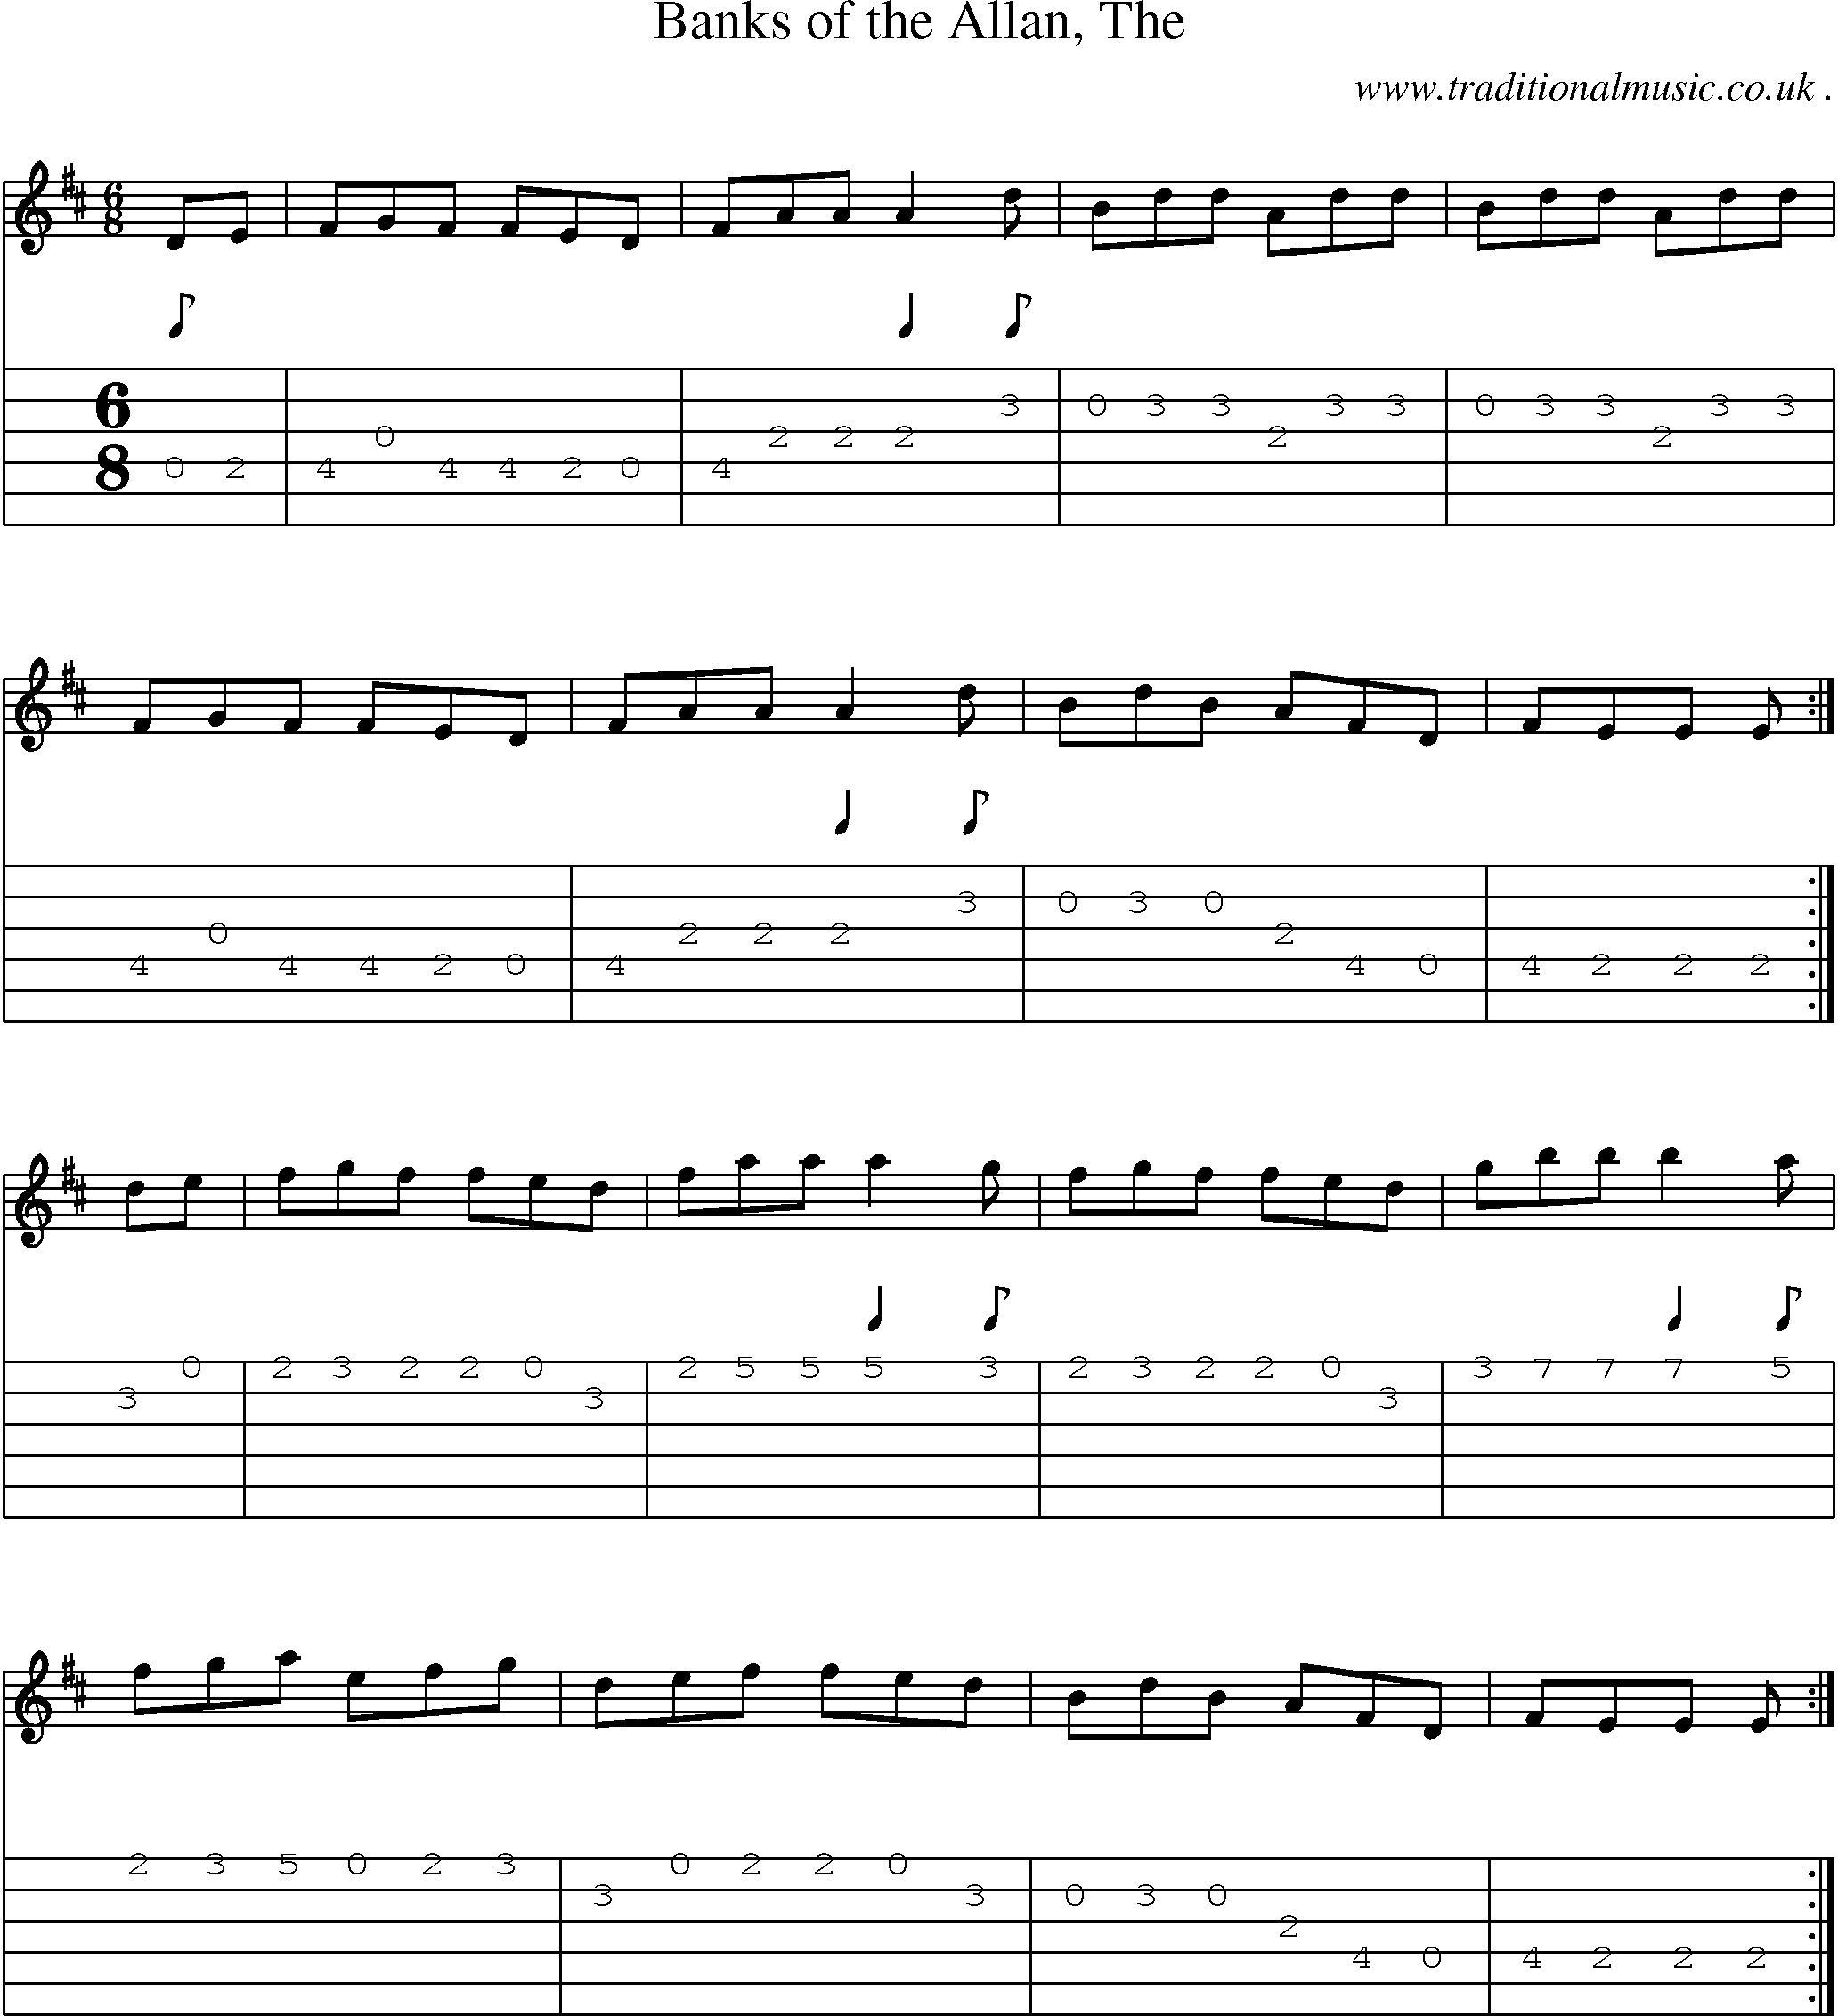 Sheet-music  score, Chords and Guitar Tabs for Banks Of The Allan The